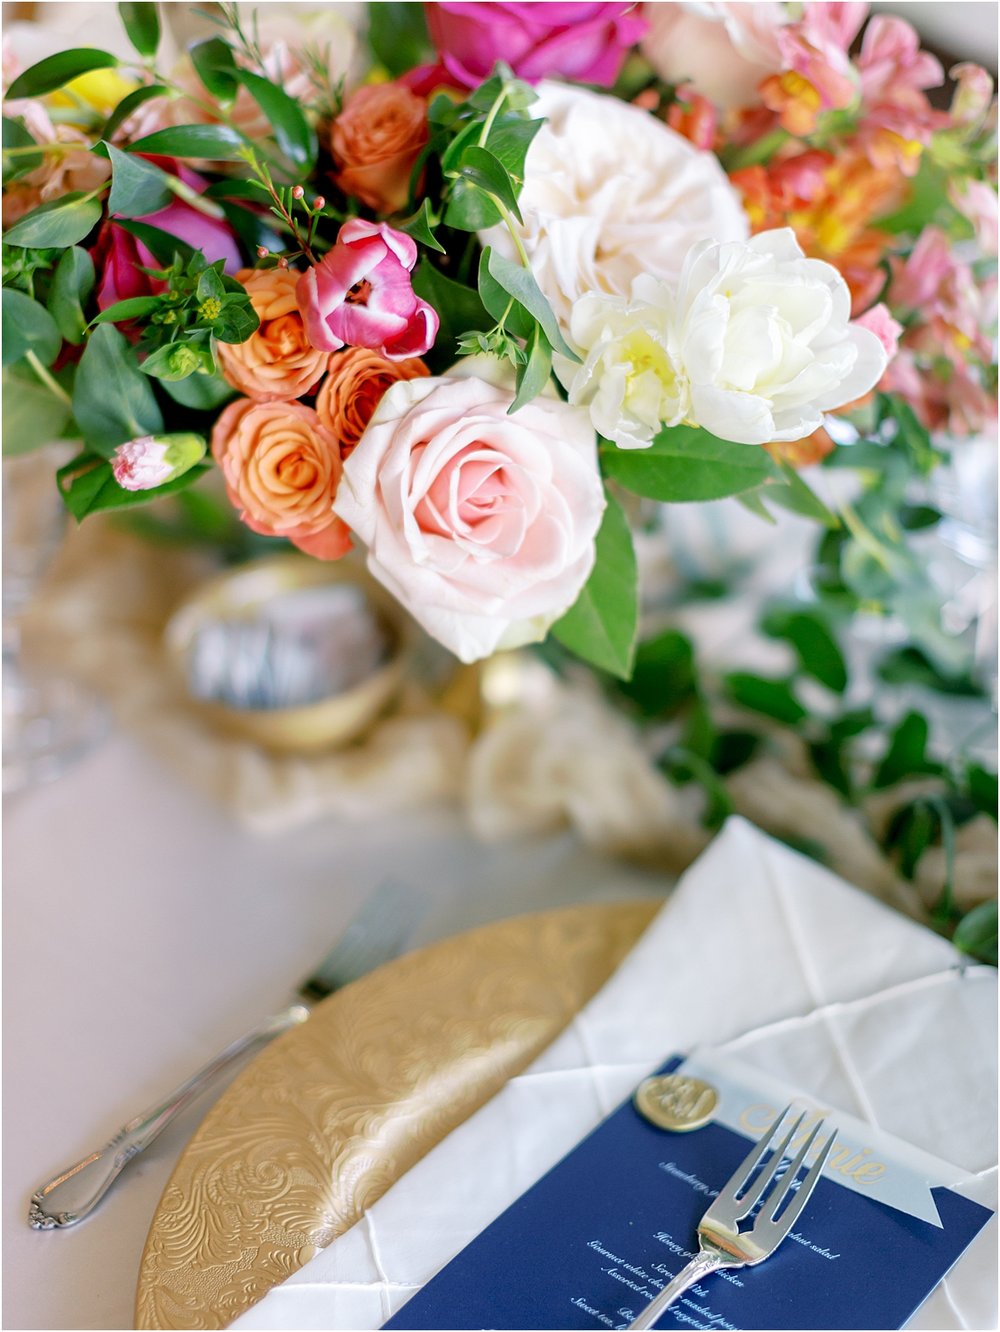 Pinks and oranges wedding reception table bouquet